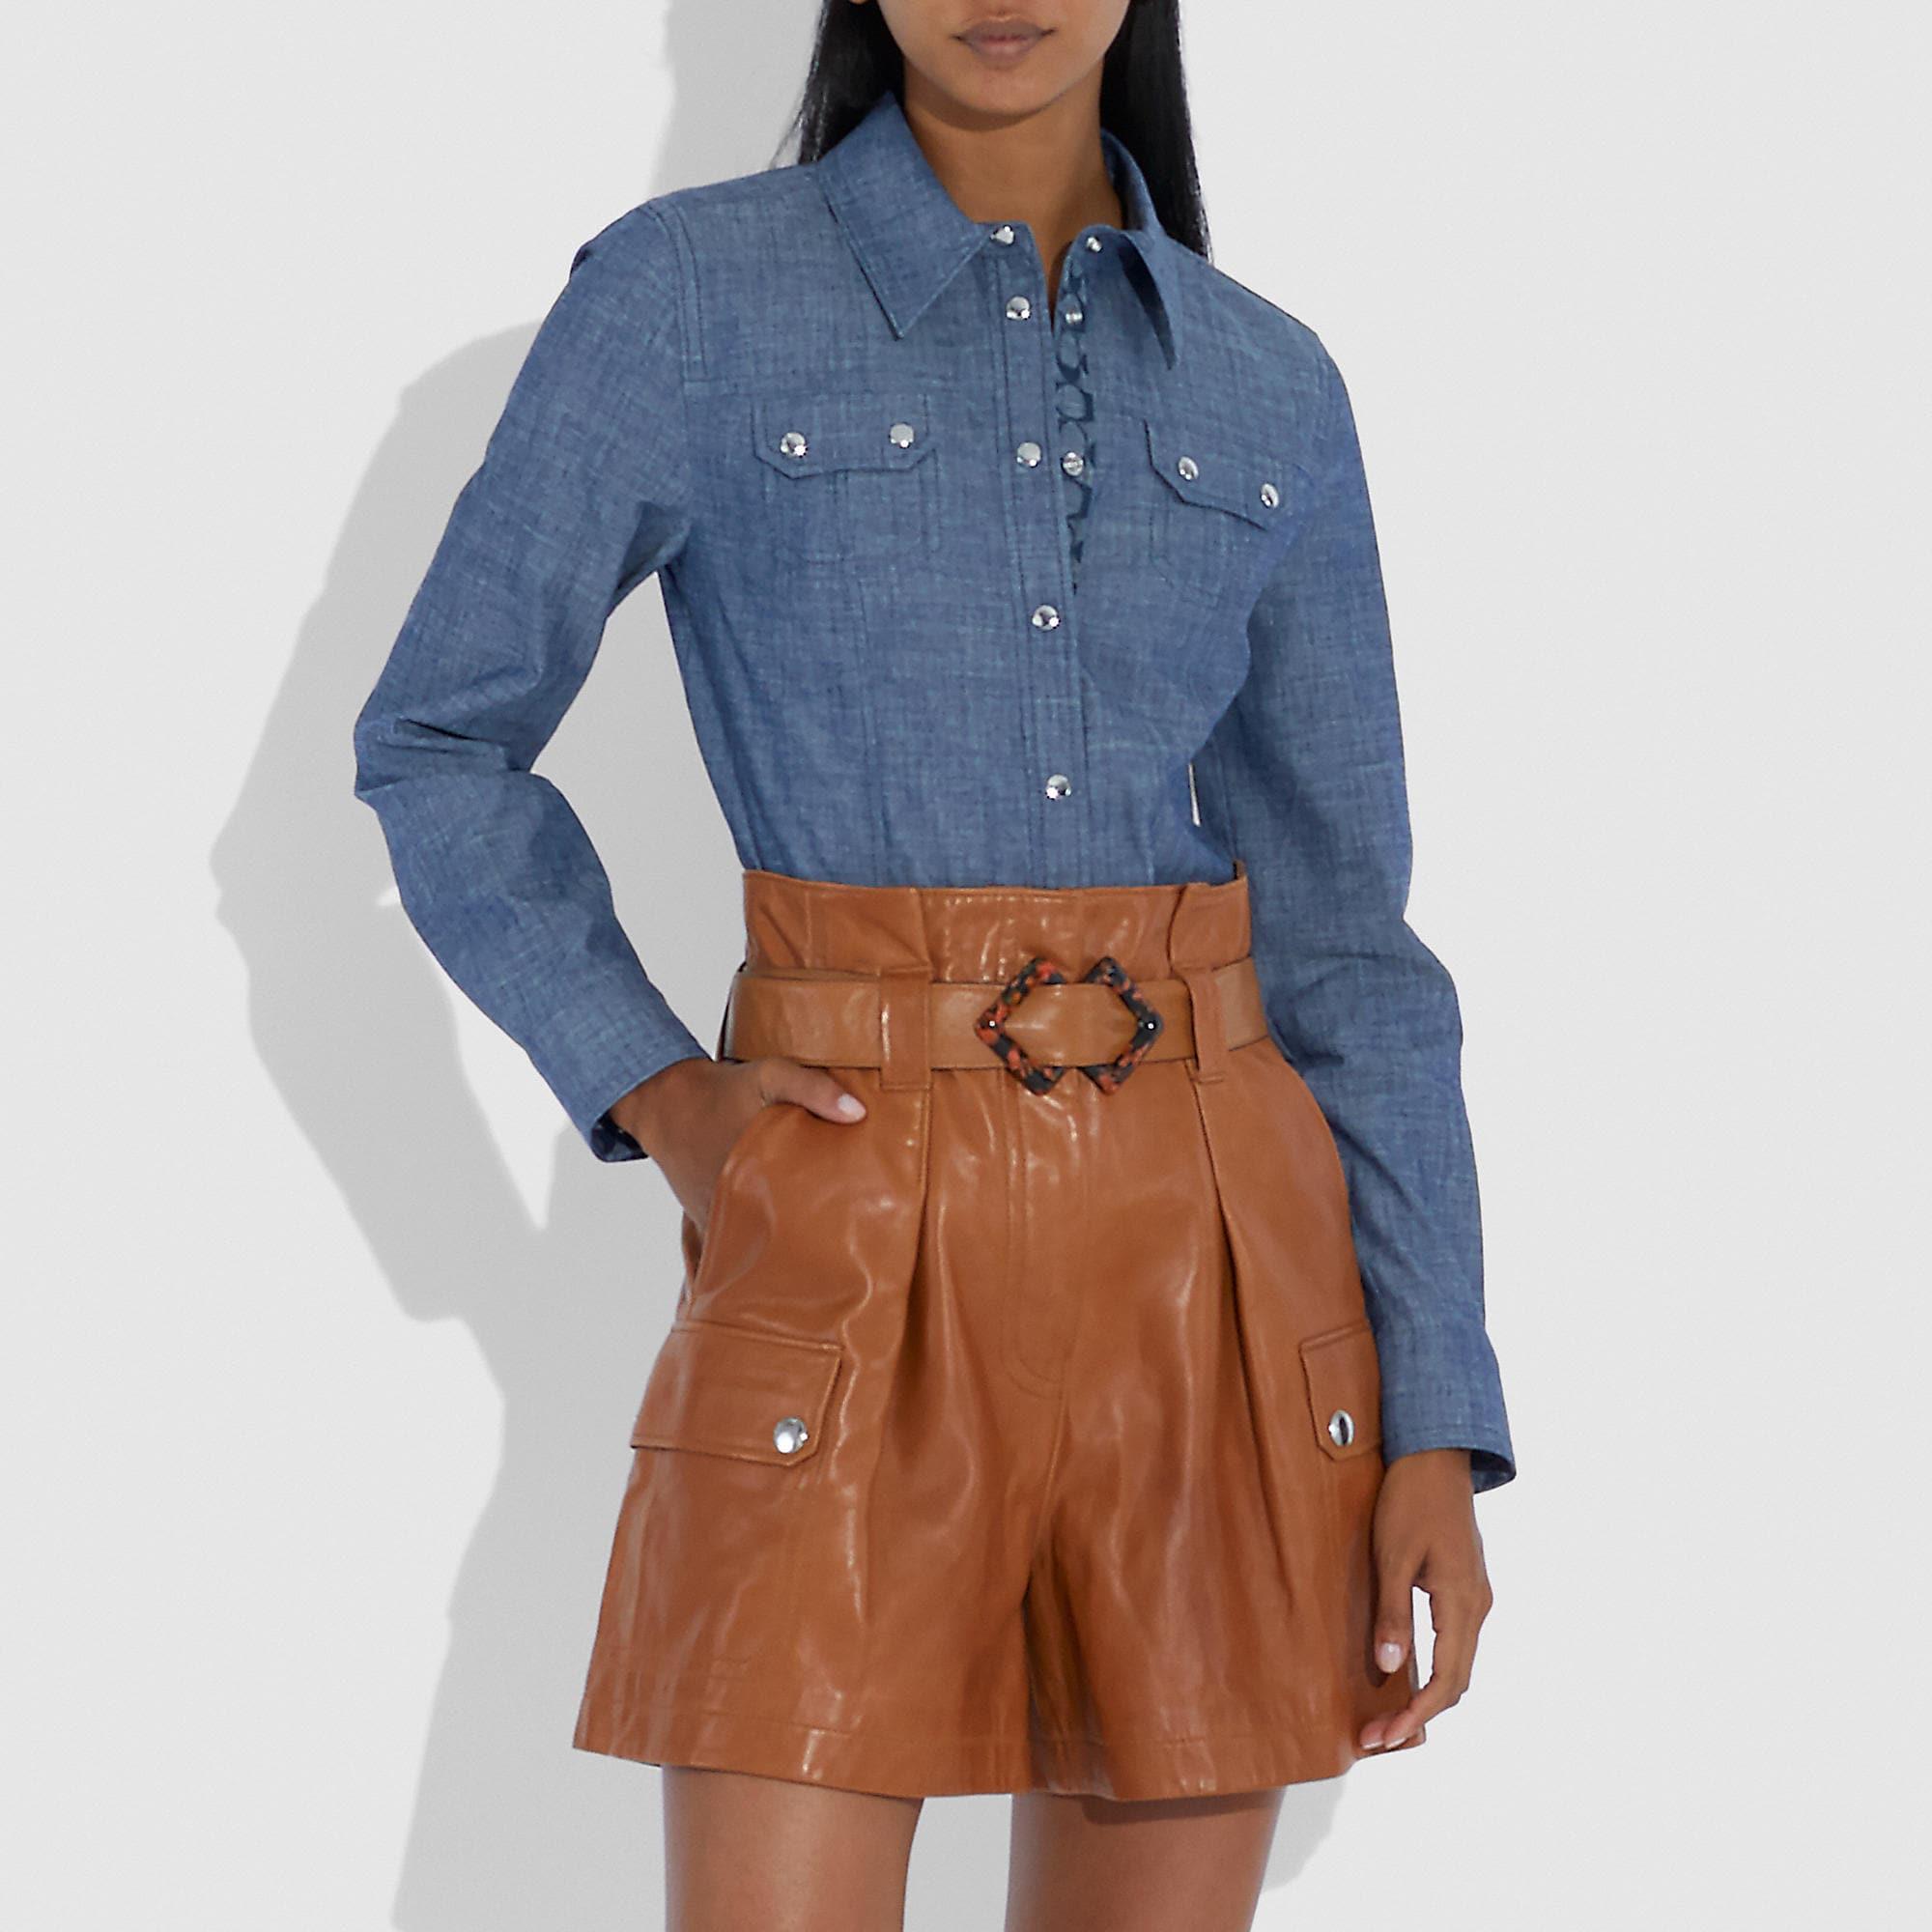 COACH Cotton Shirt in Chambray (Blue) - Lyst